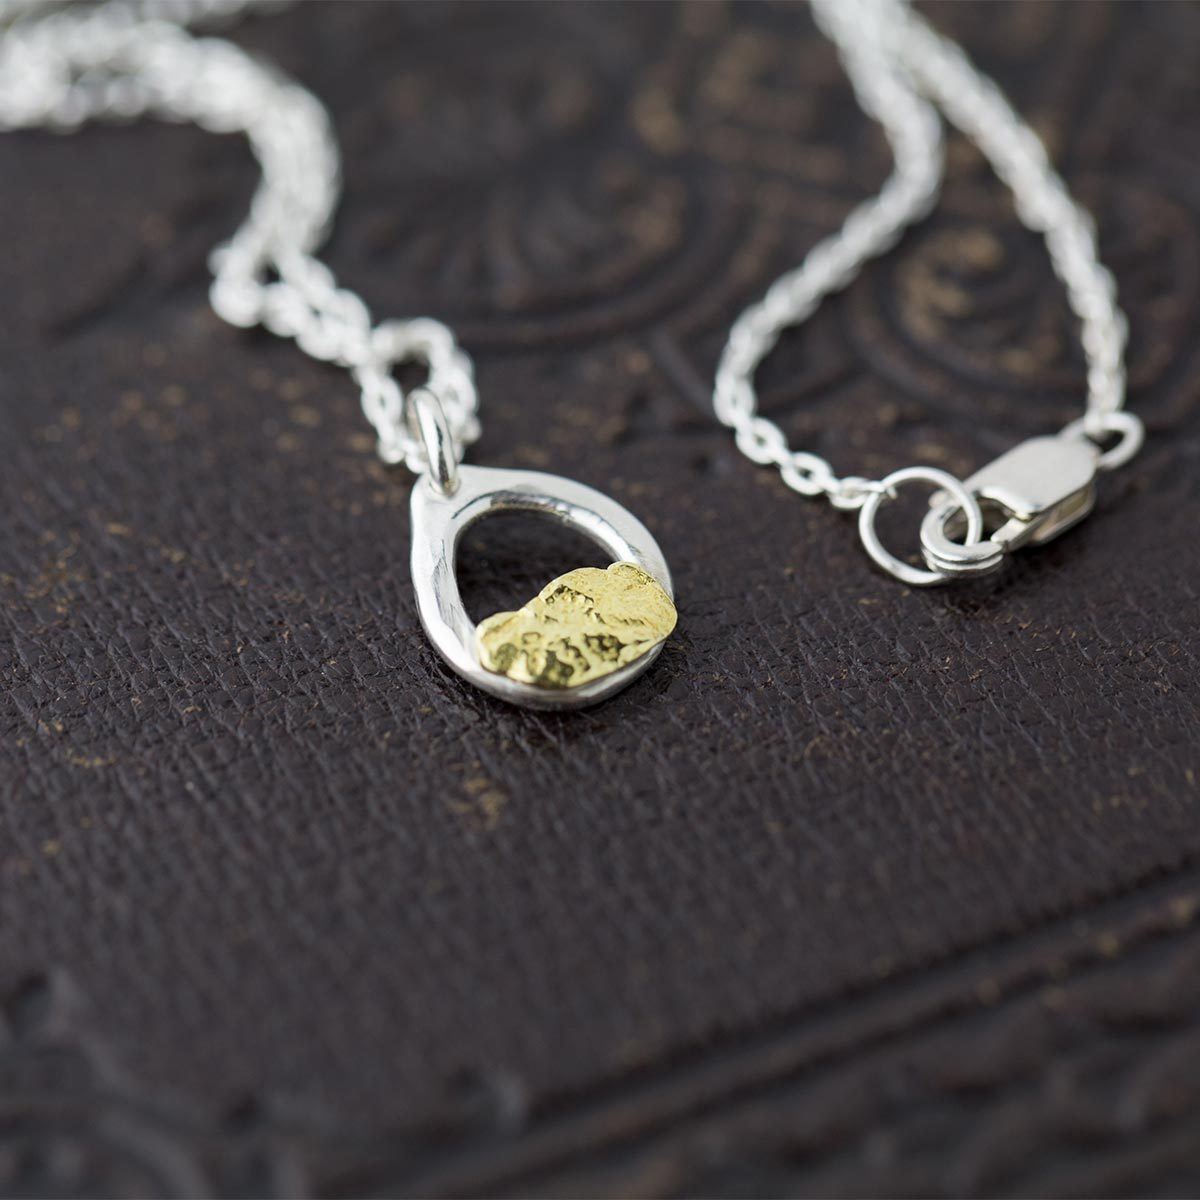 Alaska Gold Nugget & Sterling Silver Necklace - Handmade Jewelry by Burnish